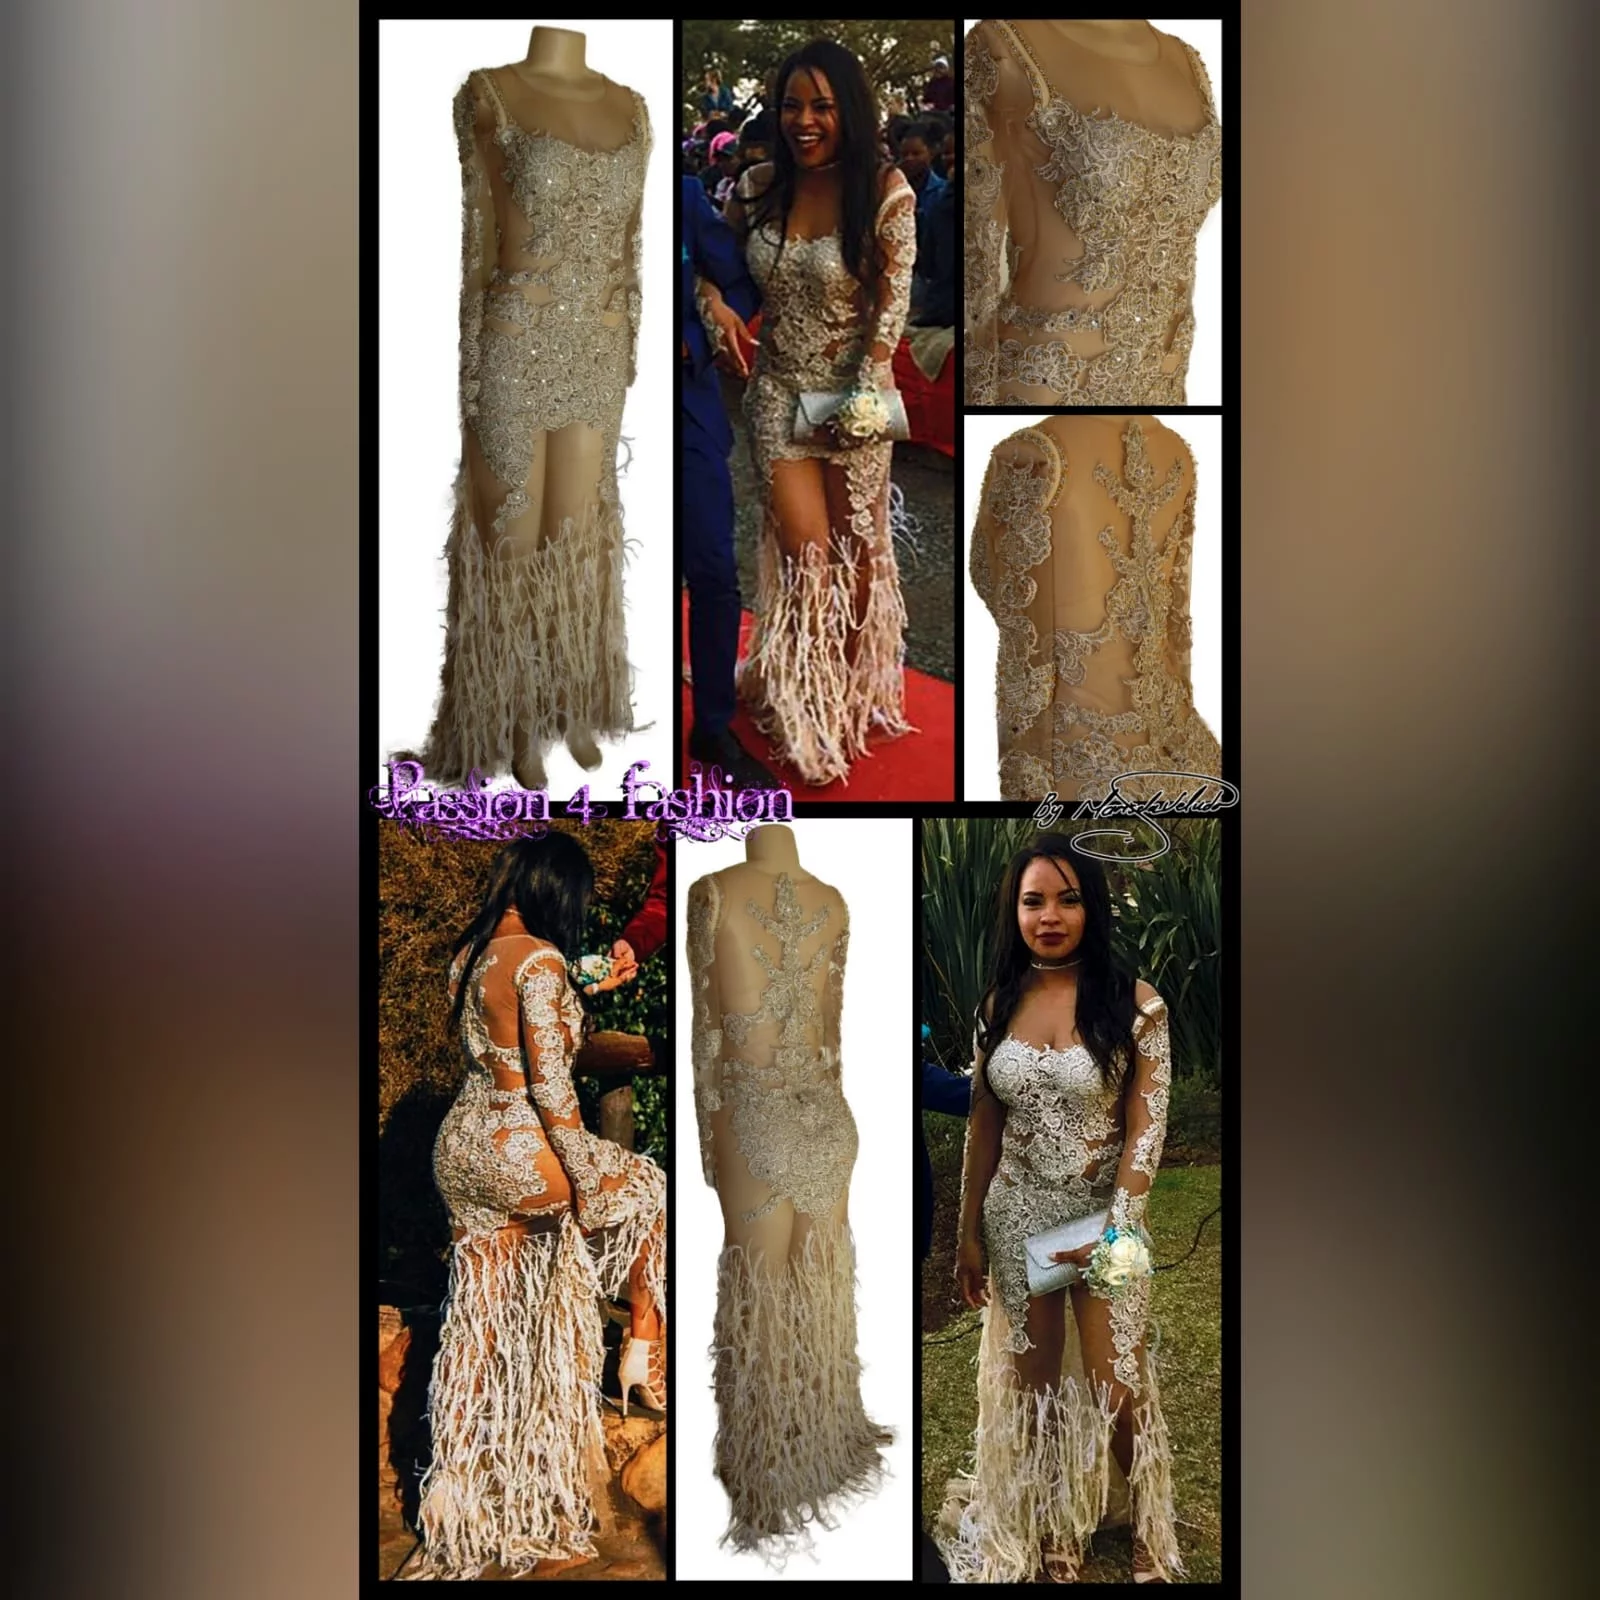 Beige illusion lace prom dress with tassels and feathers 2 beige illusion lace prom dress. With tassels and feathers. Detailing on the legs and train with a knee length slit. With removable illusion long sleeves. Dress detailed with beads.